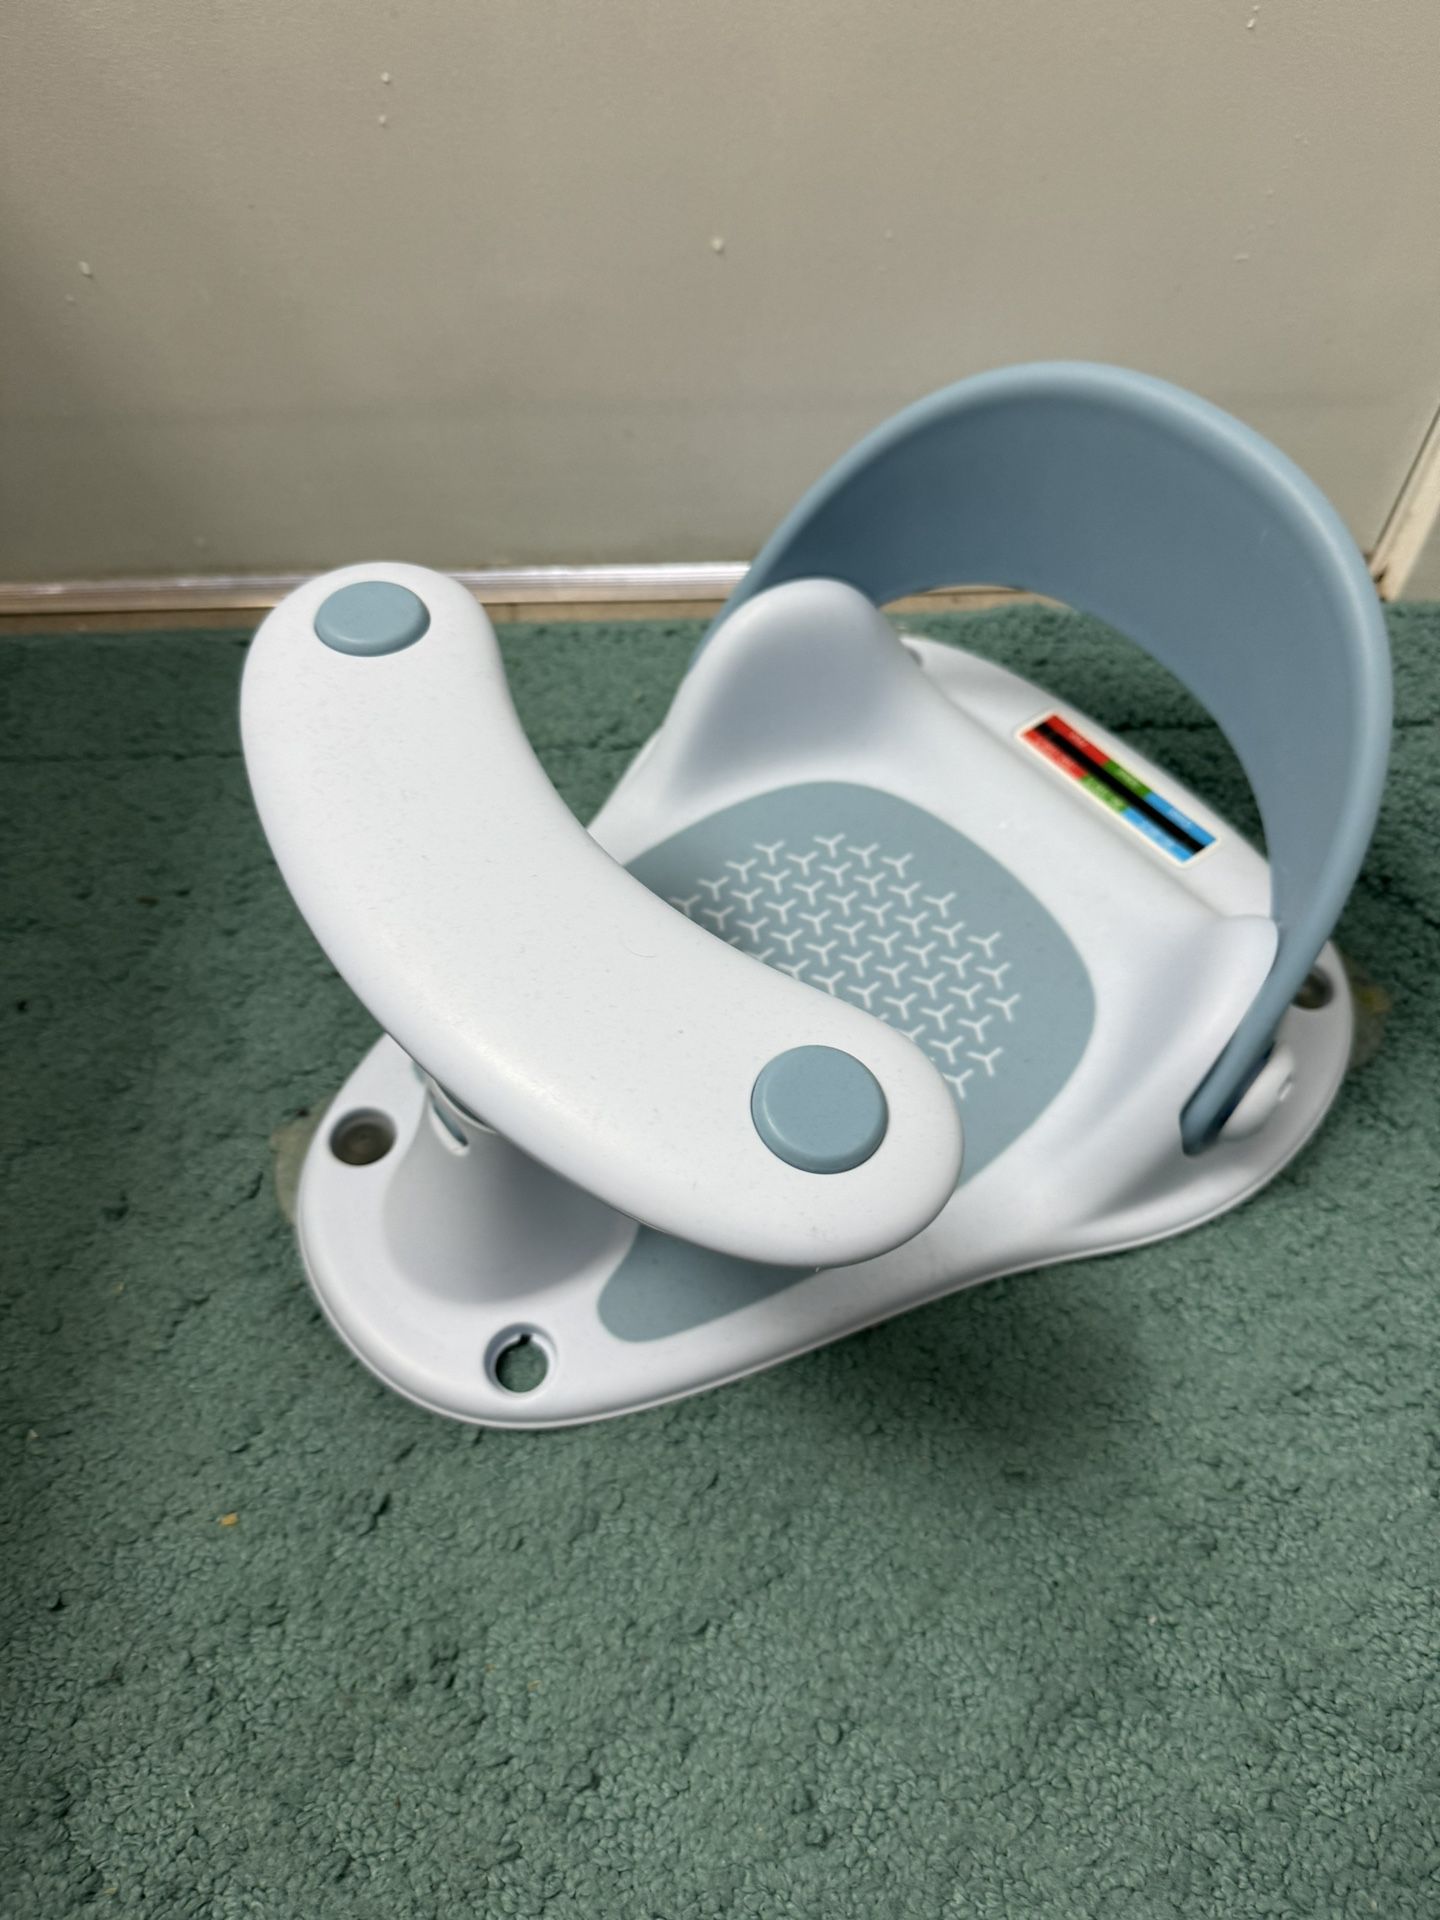 Baby Bath Seat with Water Thermometer for Infants Baby Bathing, Non-Slip Baby Bathtub Seat, Portable Foldable Baby Bath Tub Seat for Infant Toddler 6-